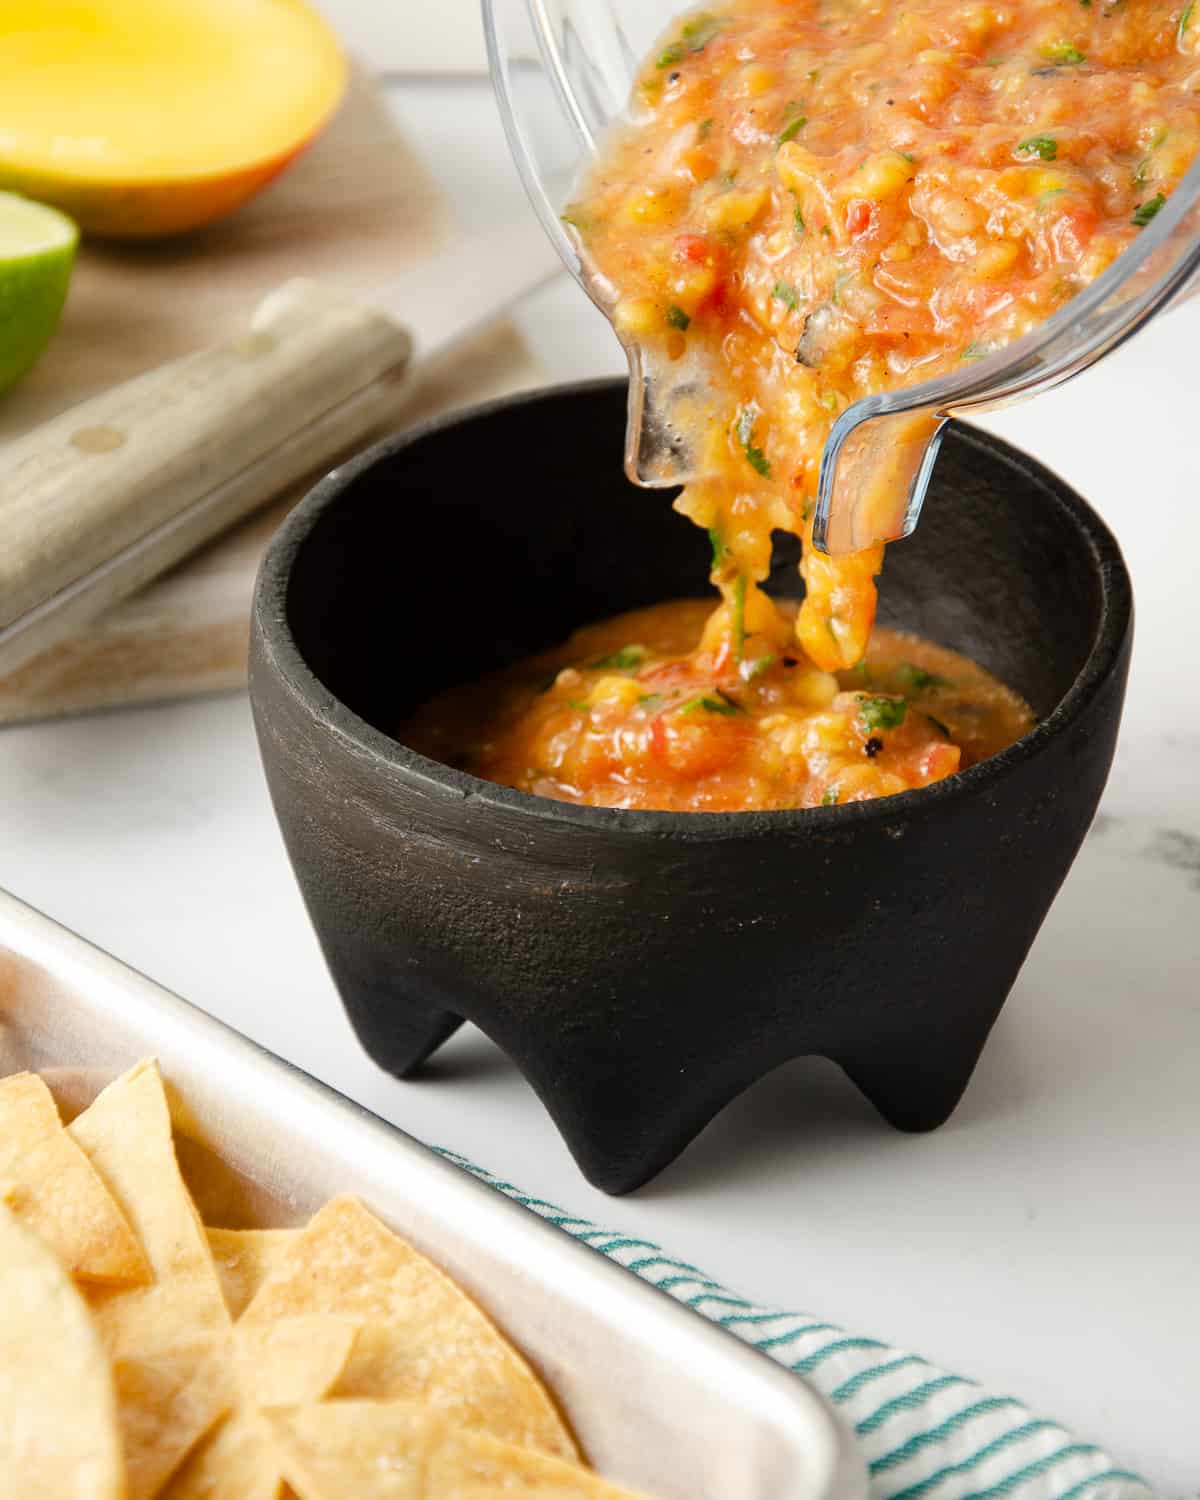 Pouring blended salsa into a molcajete.